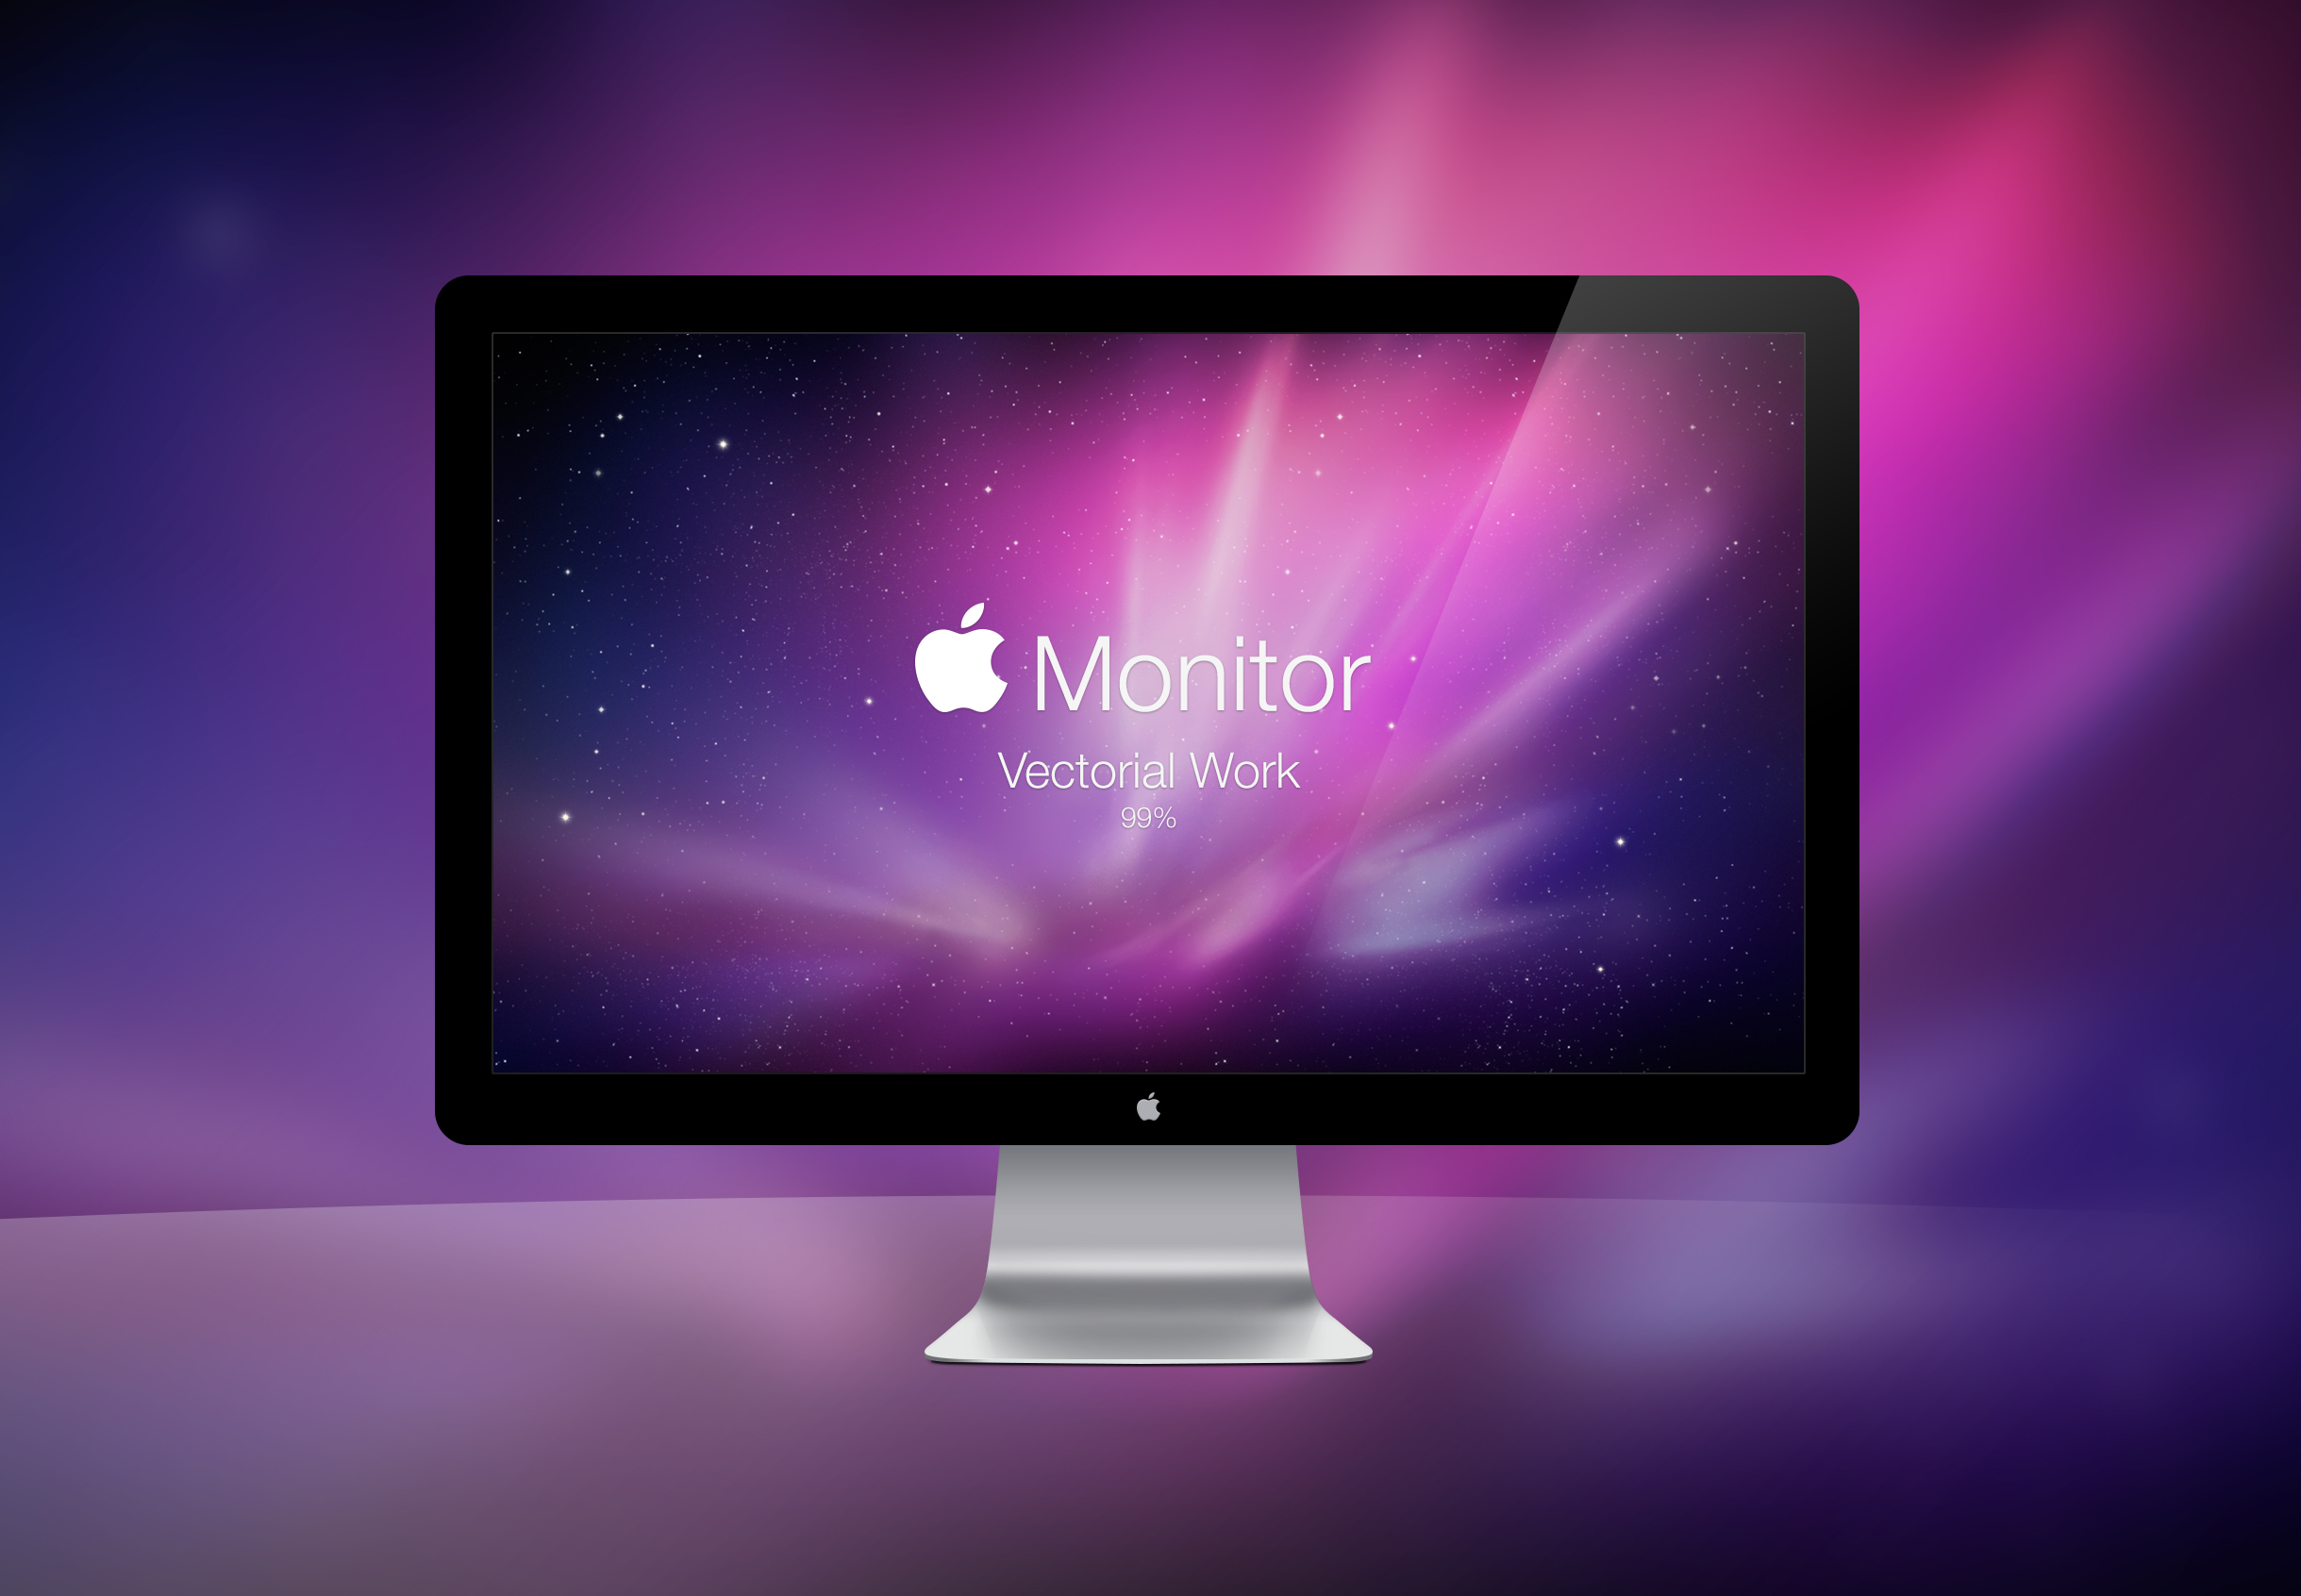 download the new version for apple Process Monitor 3.96